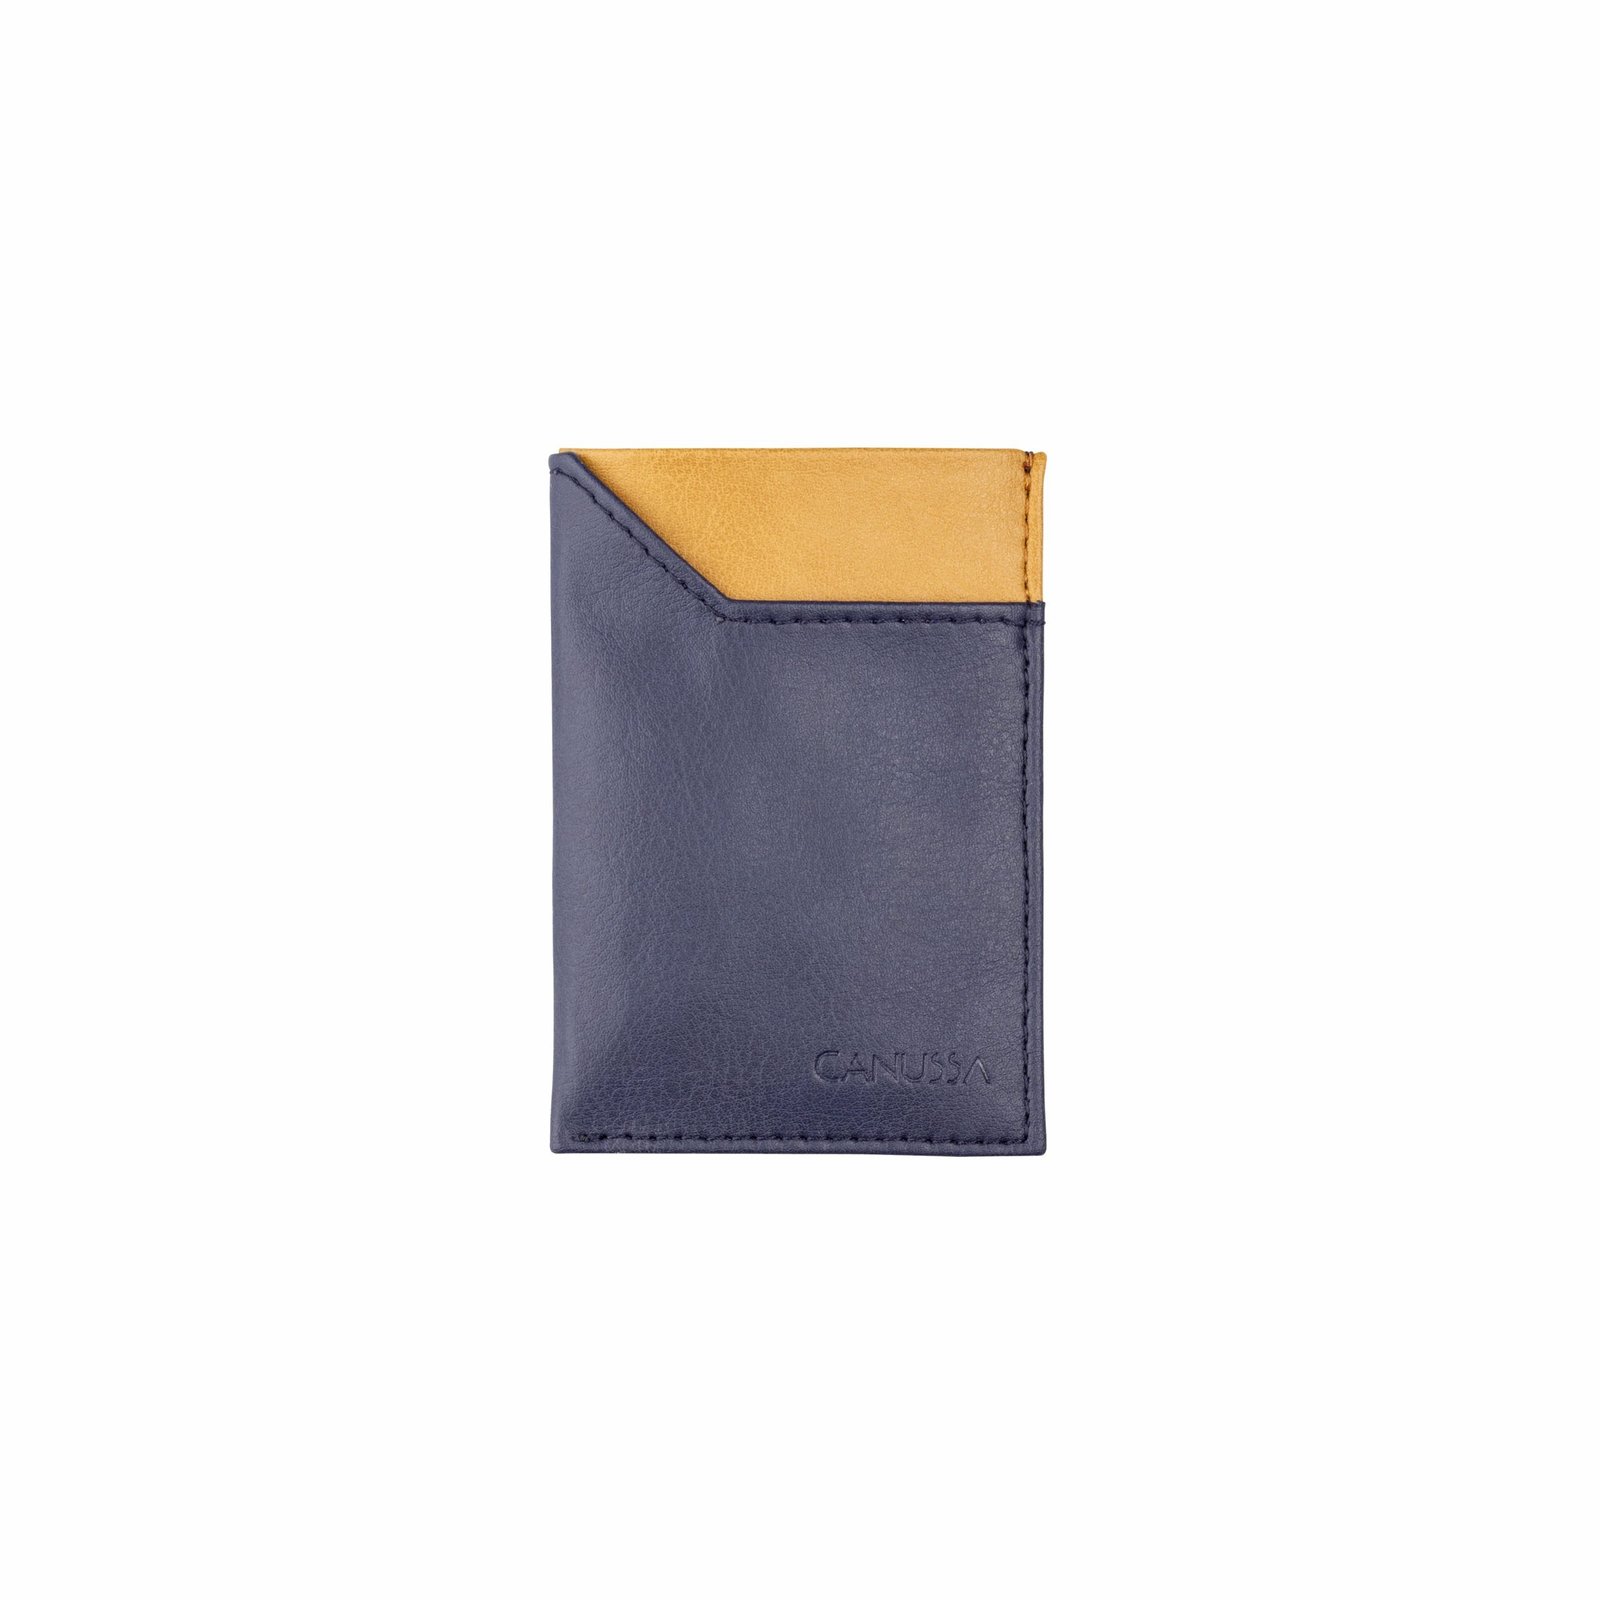 Small leather goods — Fashion